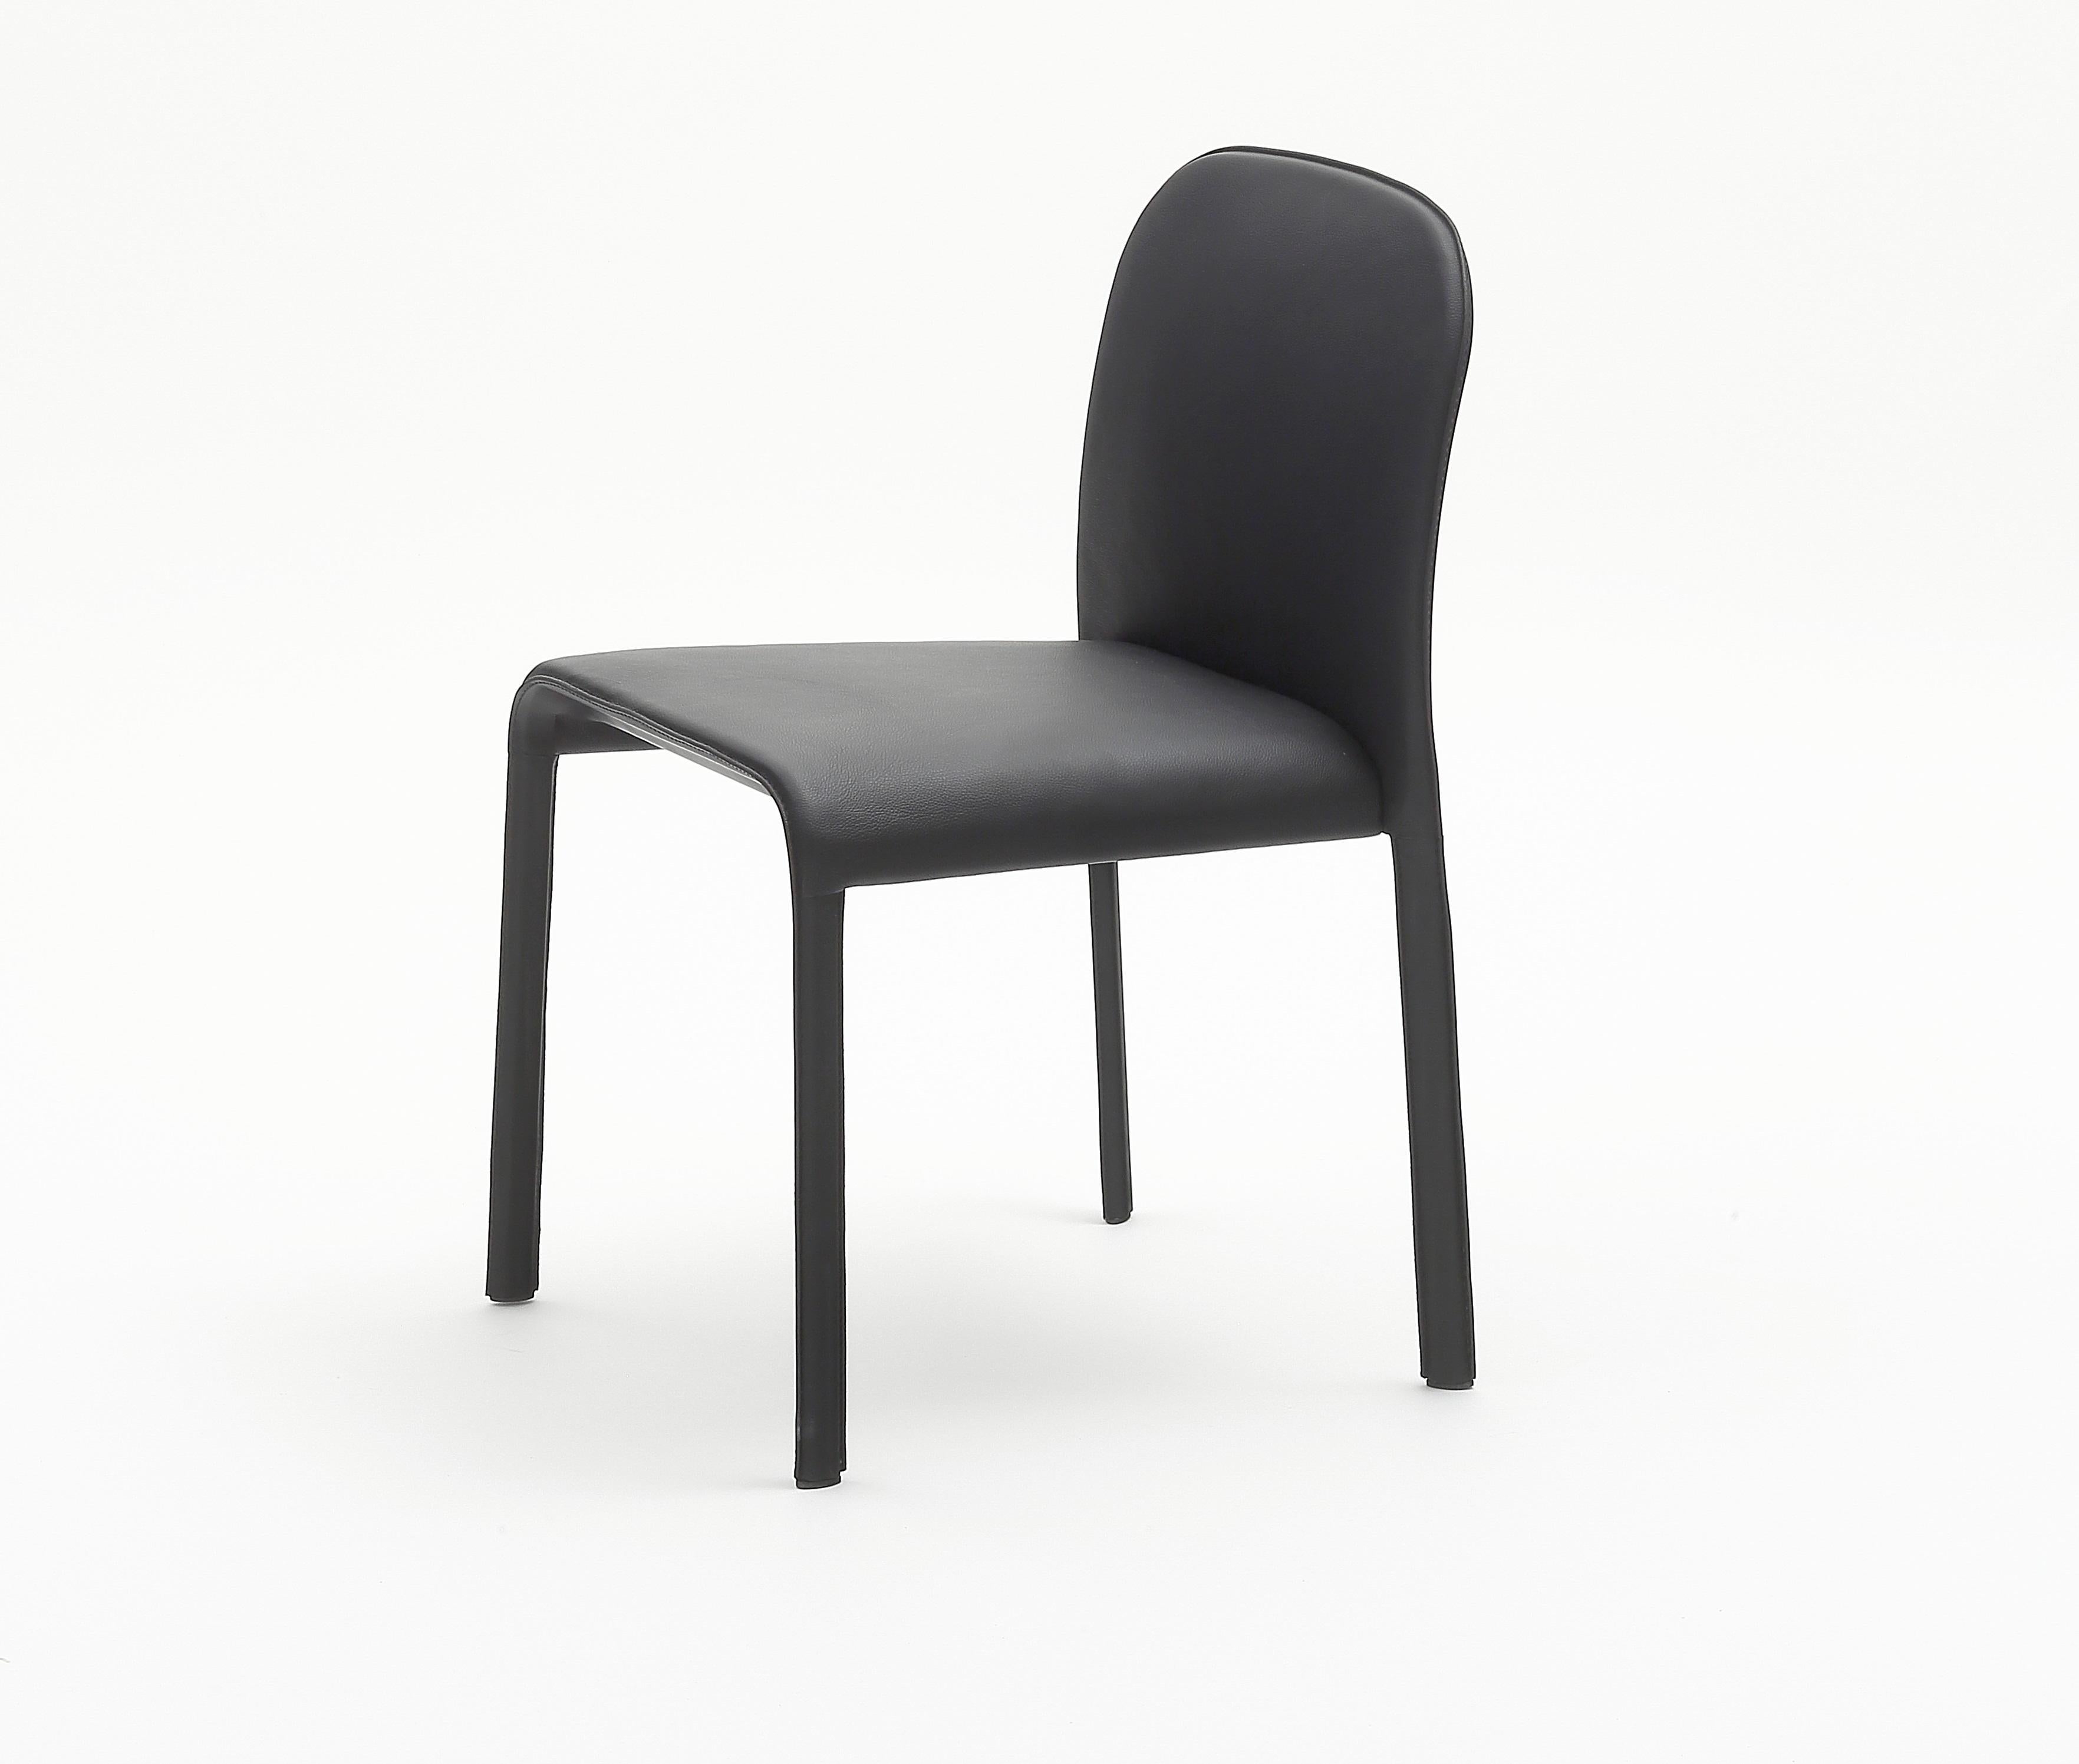 Scala chair by Patrick Jouin
Materials: Chair covered in corrected pigmented cowhide leather. Backrest in split leather. Colors: black, brown, white, red
Dimensions: D 45 x W 55 x H 80 cm
Also available in colors: black, brown, white, red.


The